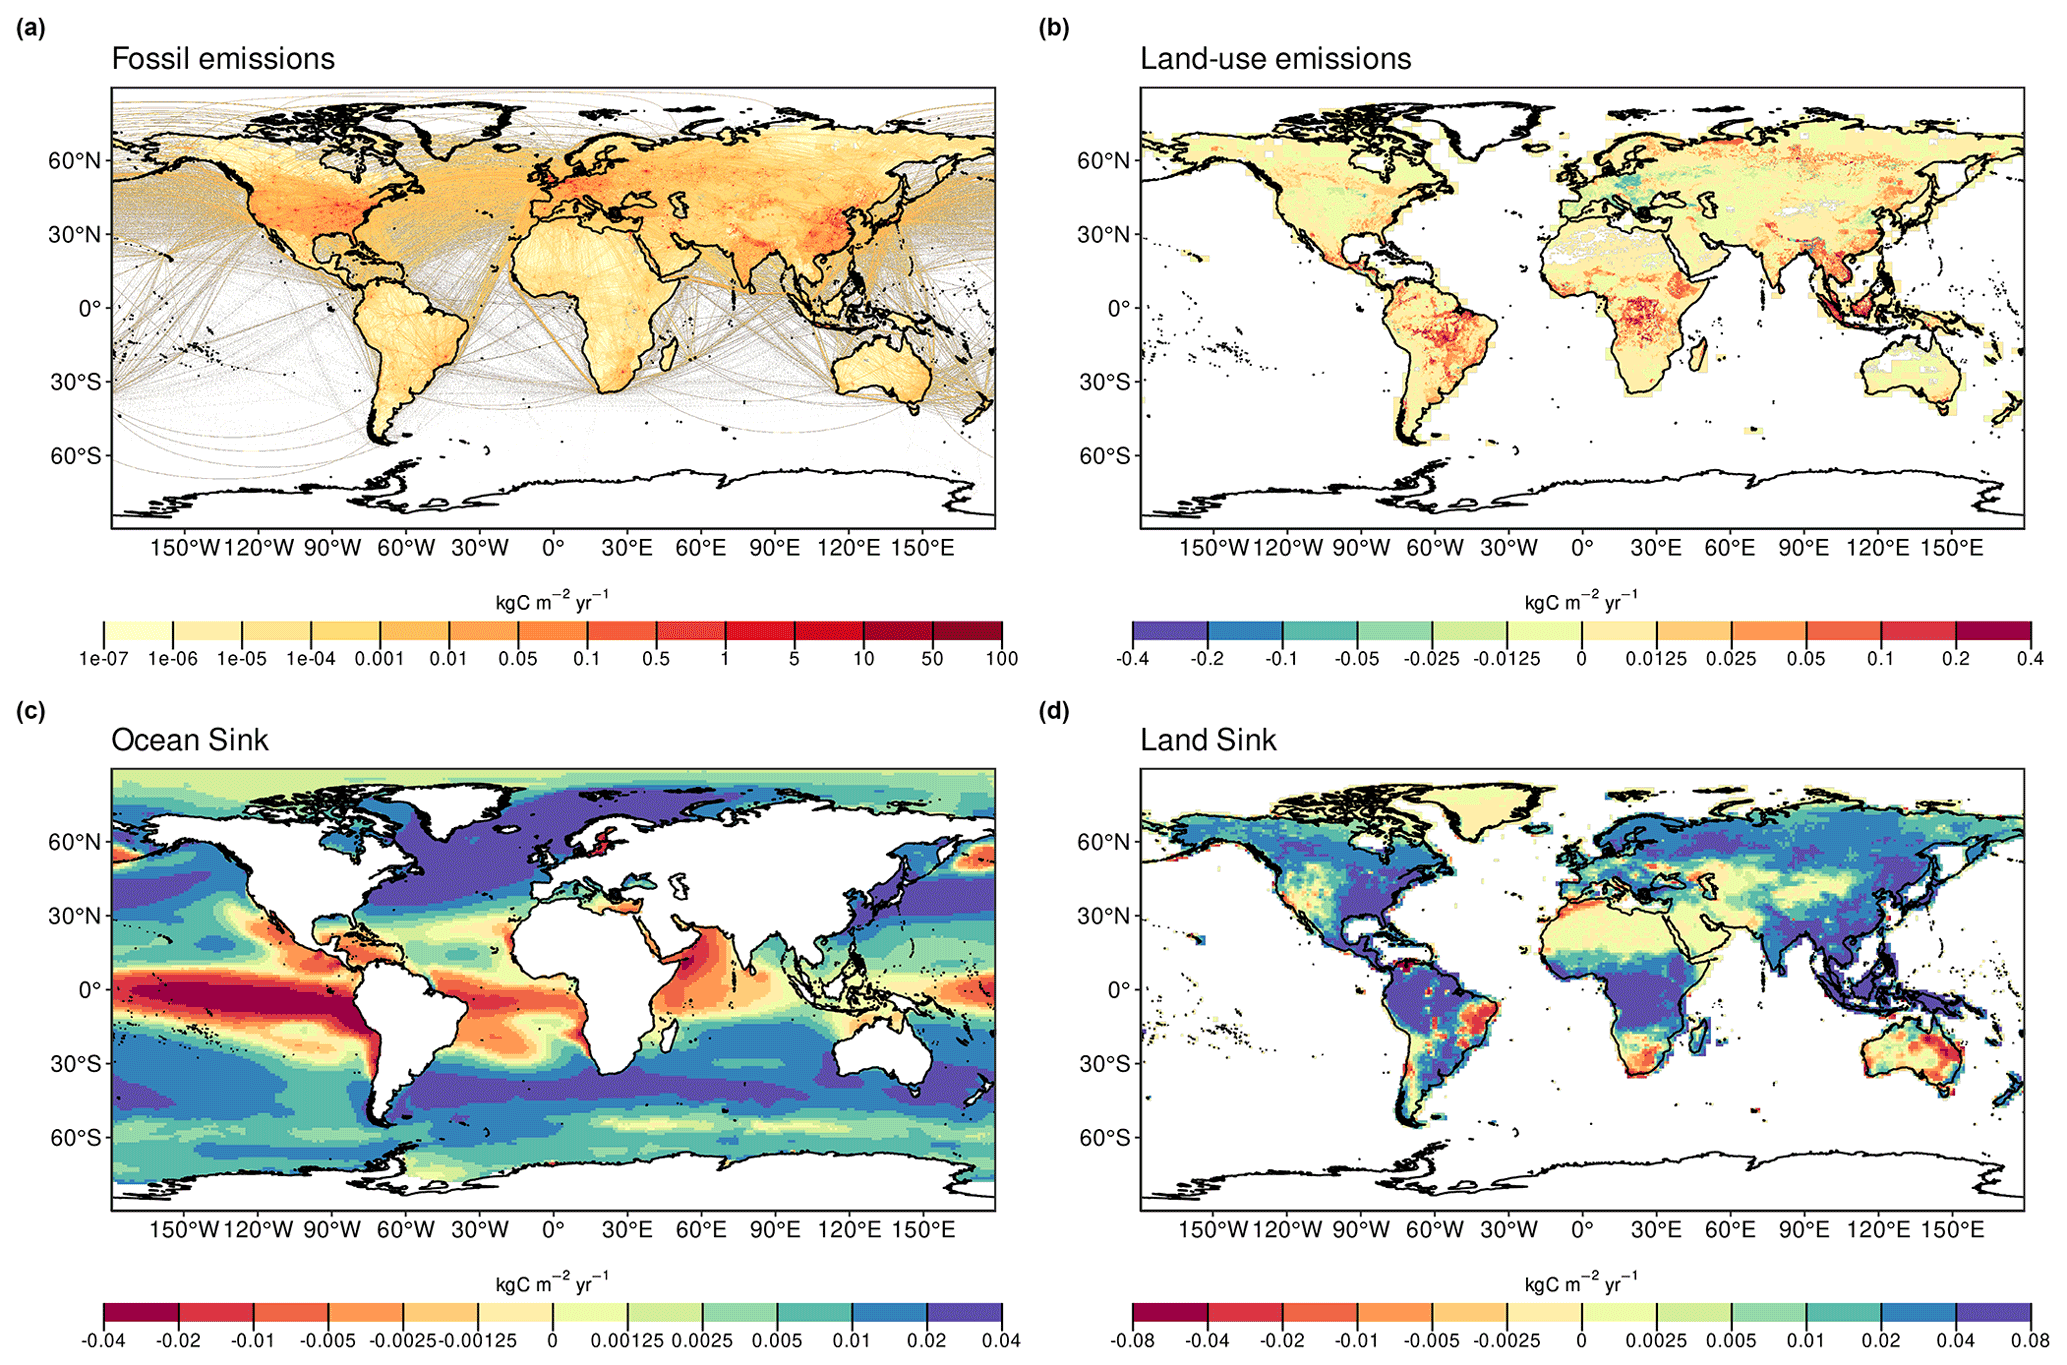 Map showing the 2012-2021 decadal mean components of the global carbon budget, presented for (a) fossil CO2 emissions (EFOS), (b) land-use change emissions (ELUC), (c) the ocean CO2 sink (SOCEAN), and (d) the land CO2 sink (SLAND). Positive values for EFOS and ELUC represent a flux to the atmosphere, whereas positive values of SOCEAN and SLAND represent a flux from the atmosphere to the ocean or the land. In all panels, yellow and red (green and blue) colours represent a flux from (into) the land and ocean to (from) the atmosphere. All units are in kgC m-2 yr-1. Note the different scales in each panel. EFOS data shown is from GCP-GridFEDv2022.2. ELUC data shown are only from BLUE as the updated H&N2017 and OSCAR do not resolve gridded fluxes. SOCEAN data shown are the average of GOBMs and data product means using GOBM simulation A with no adjustment for bias or drift applied to the gridded fields. SLAND data shown are the average of DGVMs for simulation S2. Graphic: Friedlingstein, et al., 2022 / Earth System Science Data